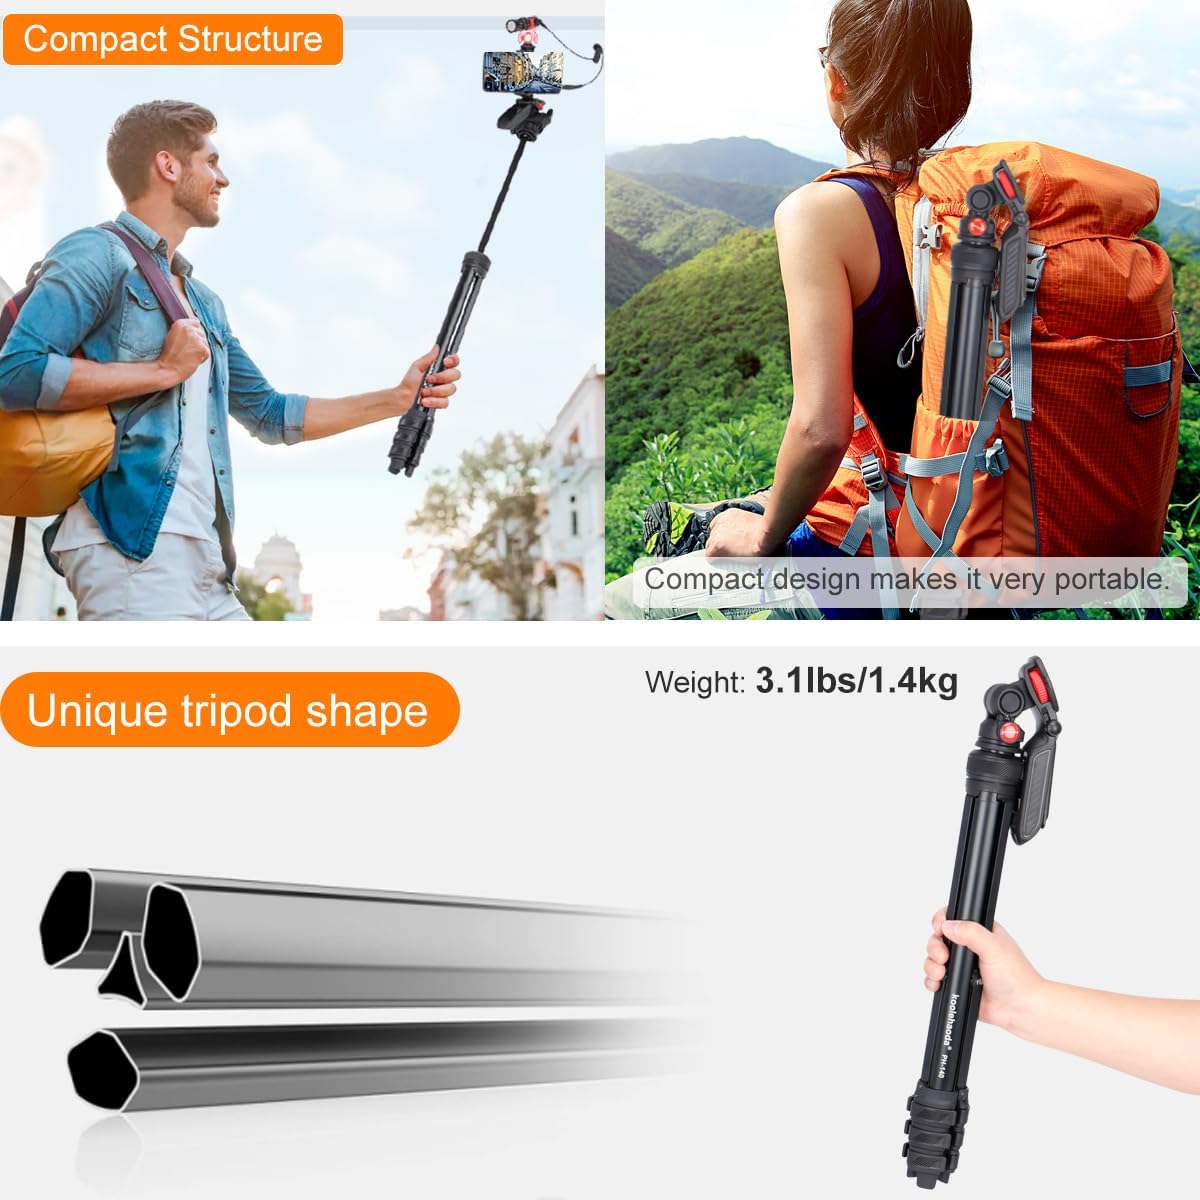 55" Phone Tripod Aluminum Extendable Travel Tripod with 360° Pan & Tilt/Phone Holder for Mirrorless/DSLR Camera/Phone, Max Load 6.6 Lbs